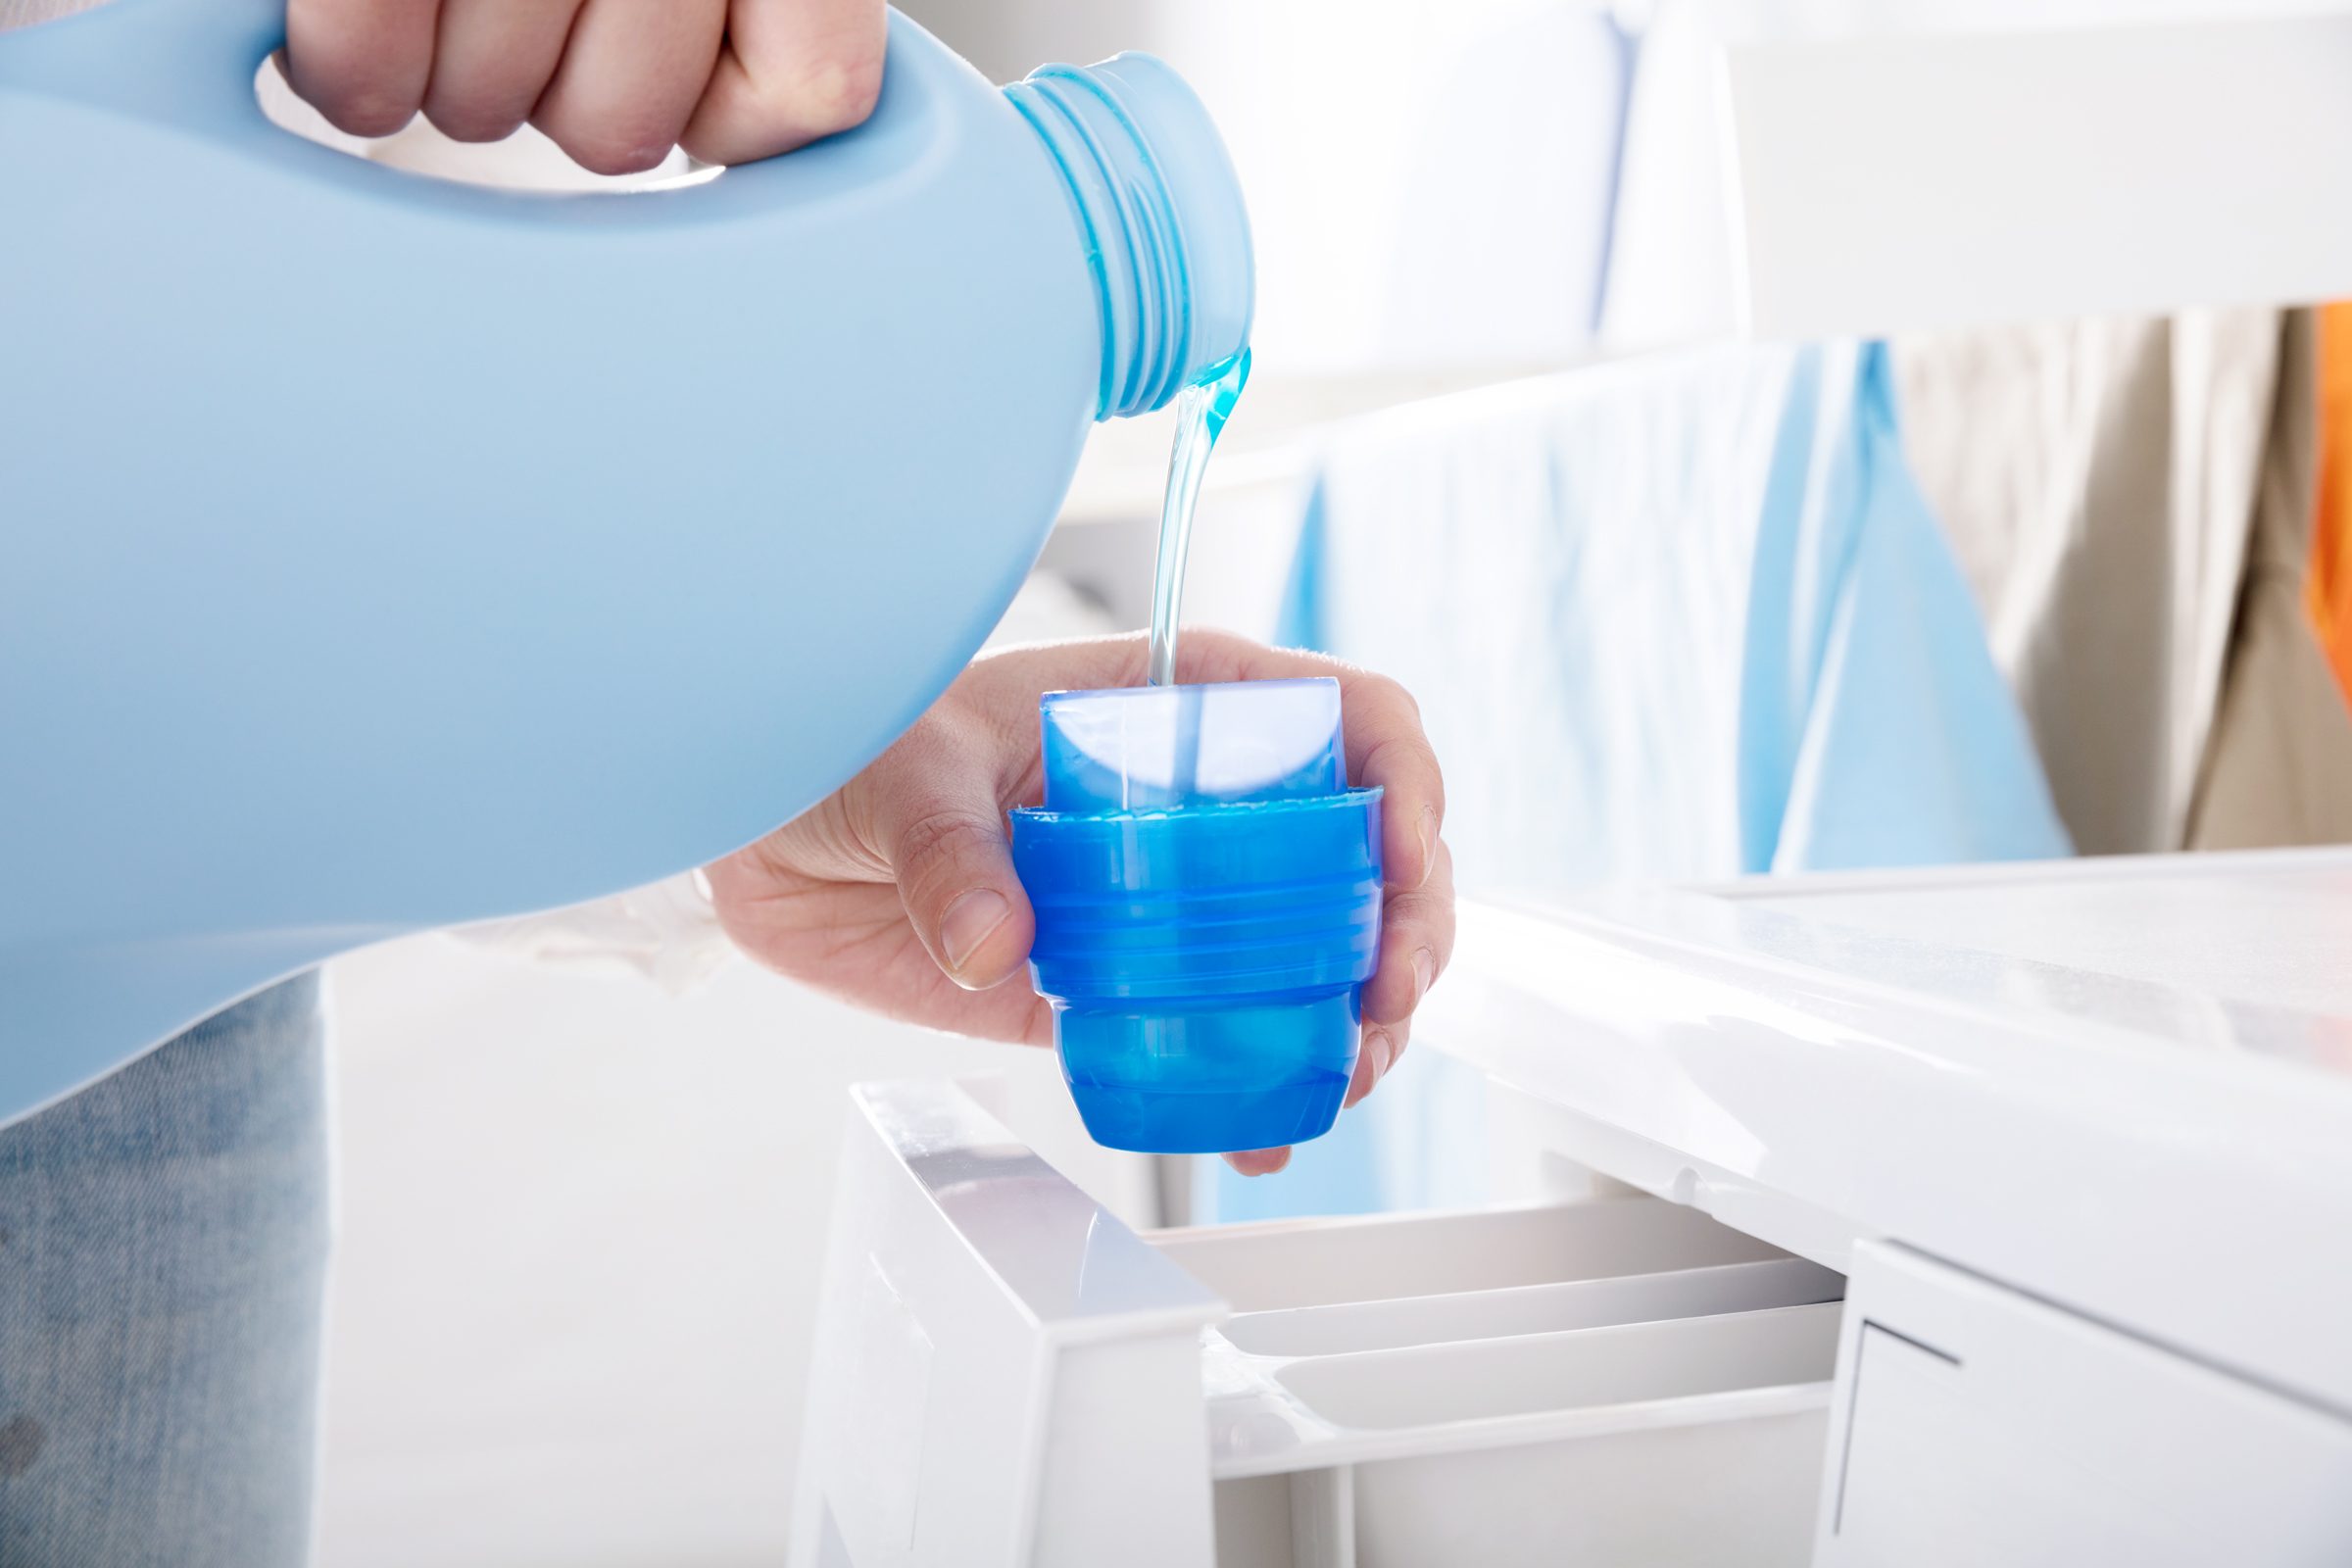 How to use Laundry Detergent Correctly